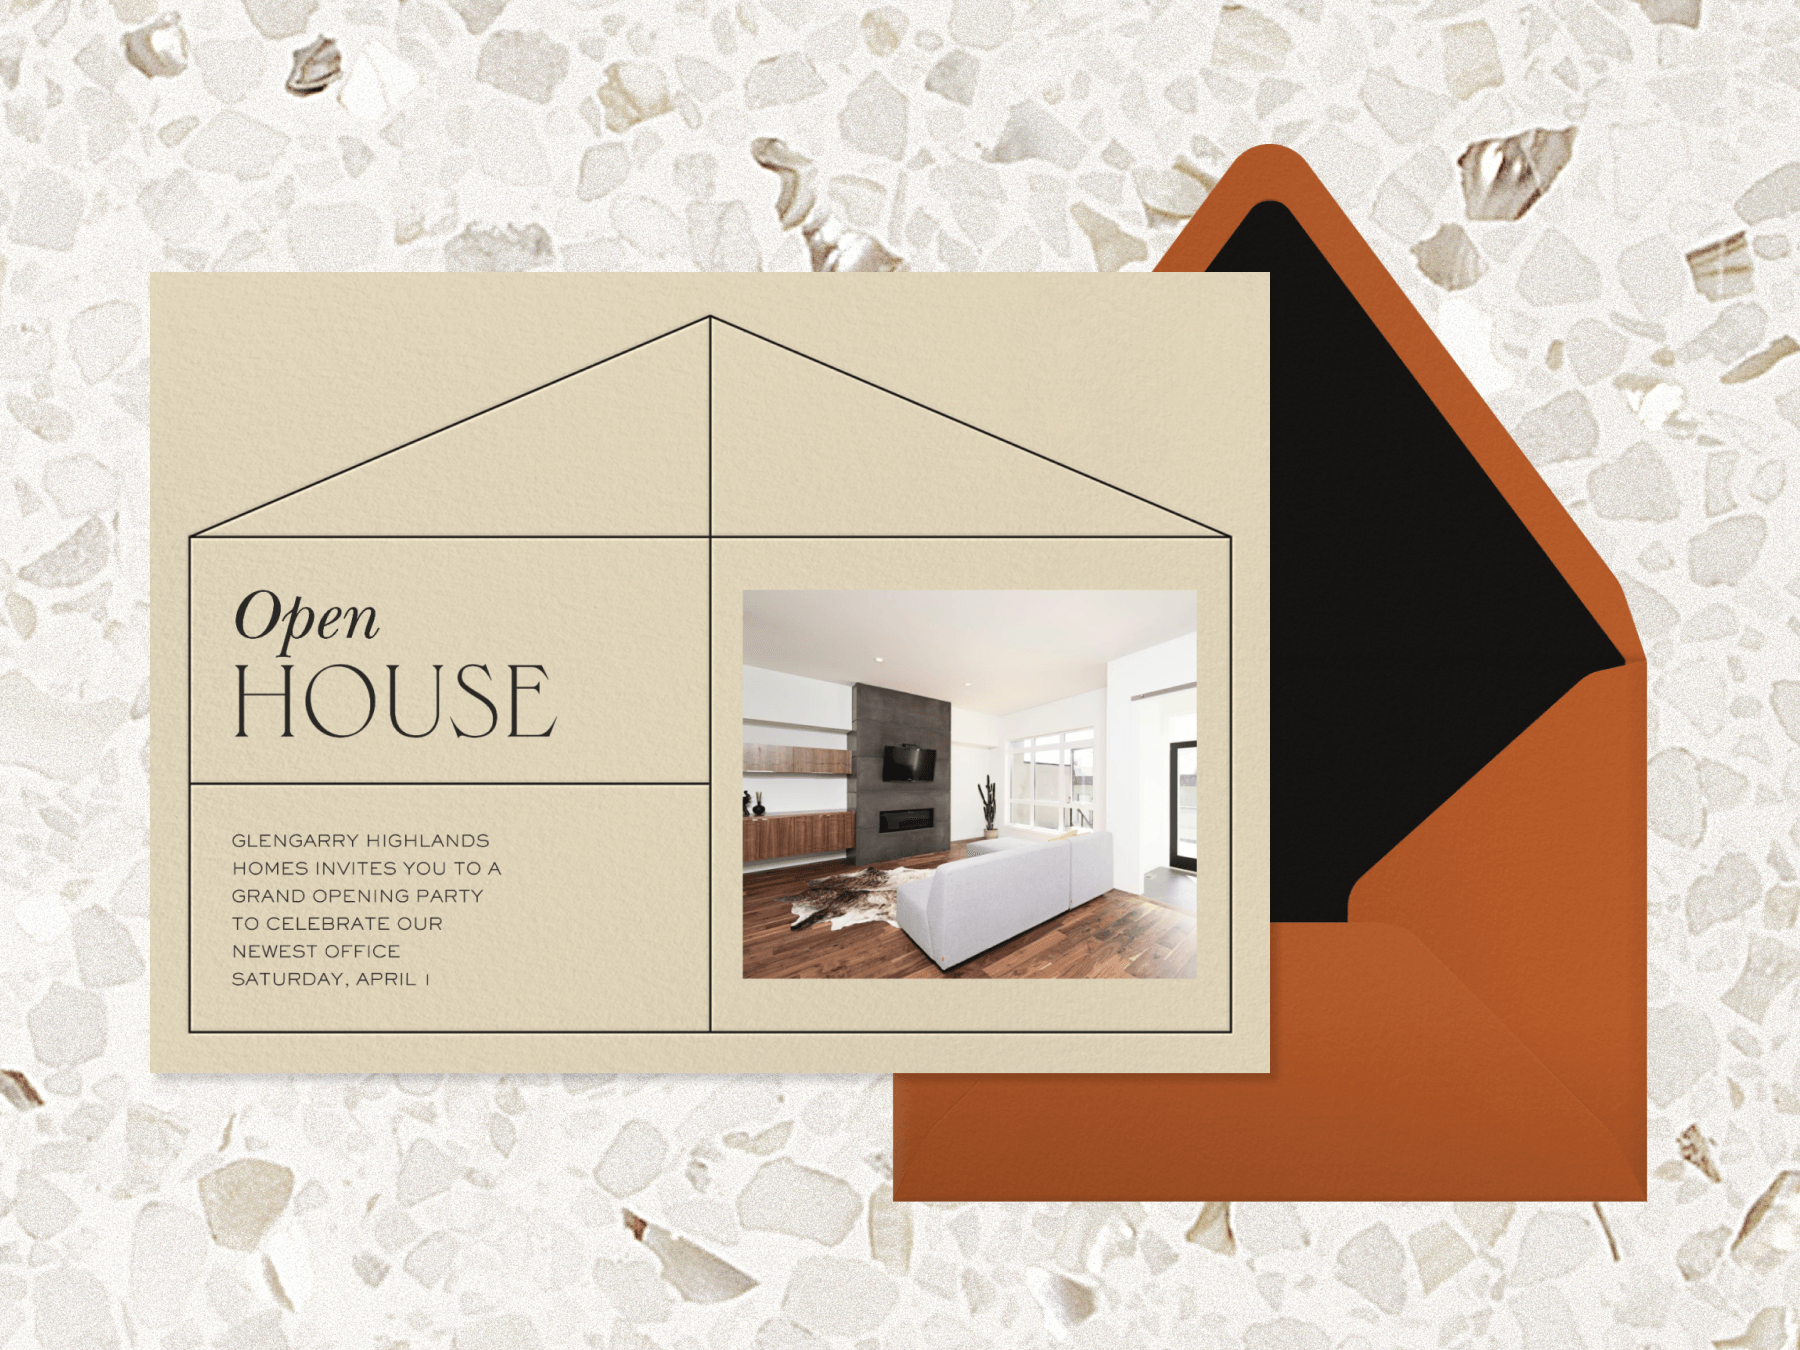 An invitation for an open house with a simplified house shape and a photo on the right of a living room with a white couch and dark fireplace.